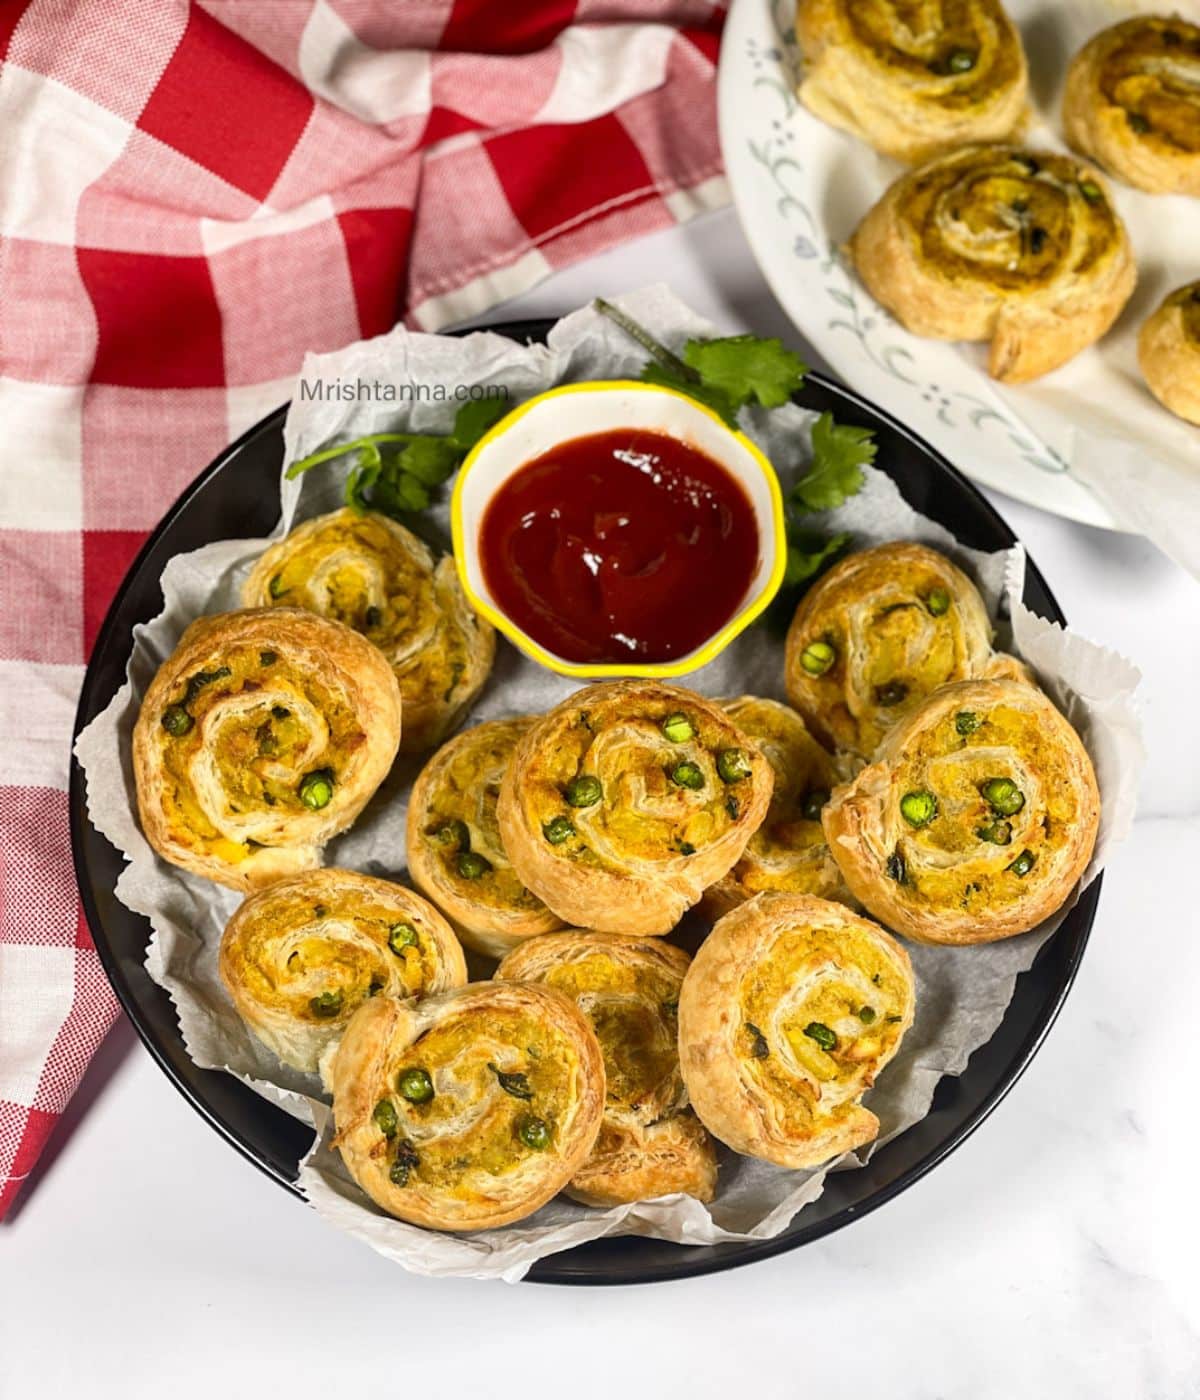 A plate of samosa pinwheels and ketchup is on the table.